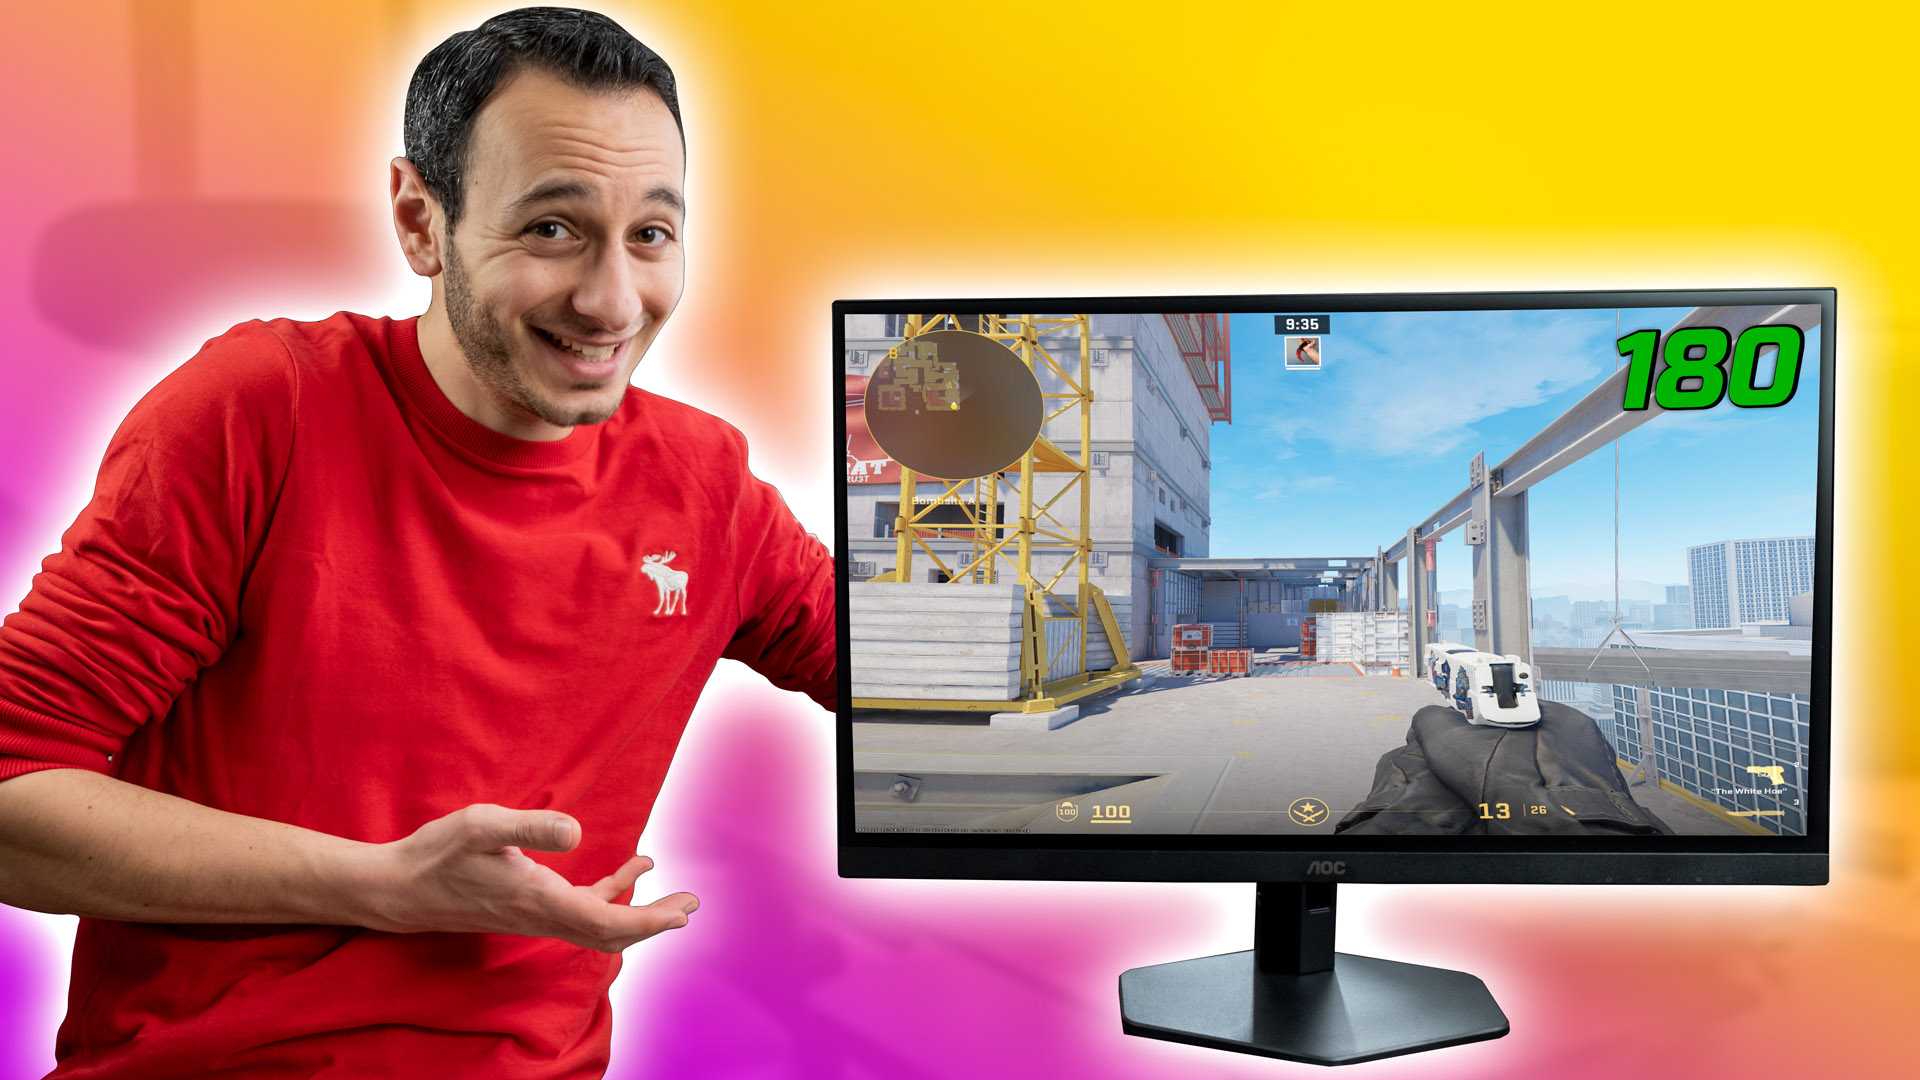 AOC Q27G3XMN 27 does anyone have info on when this monitor going to release  : r/Monitors